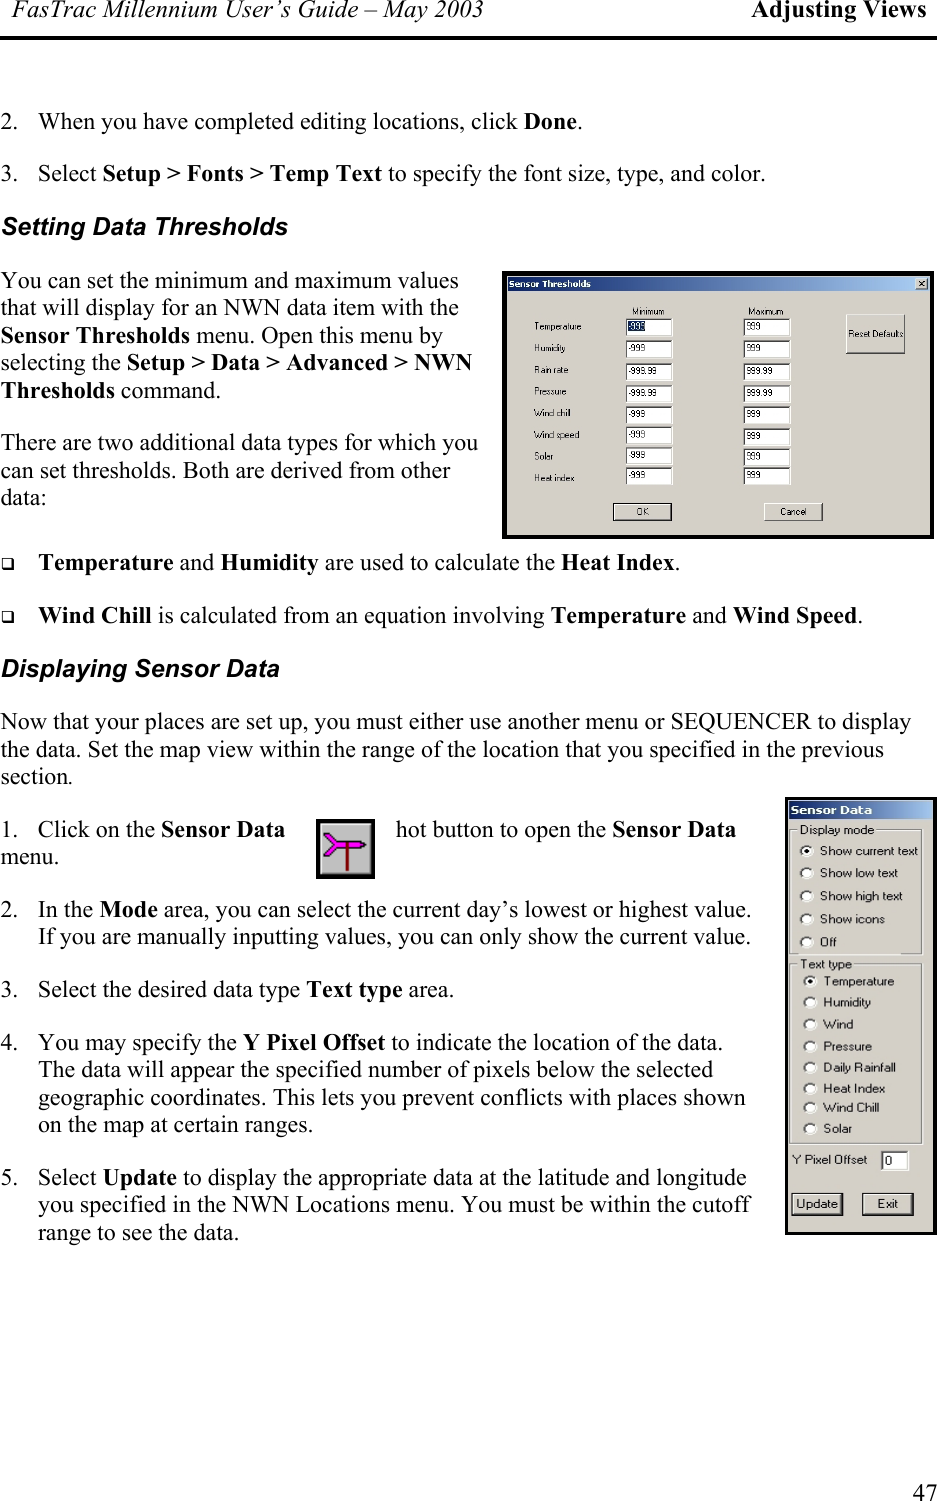 FasTrac Millennium User’s Guide – May 2003 Adjusting Views 2.  When you have completed editing locations, click Done. 3. Select Setup &gt; Fonts &gt; Temp Text to specify the font size, type, and color. Setting Data Thresholds You can set the minimum and maximum values that will display for an NWN data item with the Sensor Thresholds menu. Open this menu by selecting the Setup &gt; Data &gt; Advanced &gt; NWN Thresholds command. There are two additional data types for which you can set thresholds. Both are derived from other data:    Temperature and Humidity are used to calculate the Heat Index.   Wind Chill is calculated from an equation involving Temperature and Wind Speed. Displaying Sensor Data Now that your places are set up, you must either use another menu or SEQUENCER to display the data. Set the map view within the range of the location that you specified in the previous section. 1.  Click on the Sensor Data  hot button to open the Sensor Data menu. 2. In the Mode area, you can select the current day’s lowest or highest value. If you are manually inputting values, you can only show the current value. 3.  Select the desired data type Text type area. 4.  You may specify the Y Pixel Offset to indicate the location of the data. The data will appear the specified number of pixels below the selecgeographic coordinates. This lets you prevent conflicts with places shown on the map at certain ranges. ted 5. Select Update to display the appropriate data at the latitude and longitude you specified in the NWN Locations menu. You must be within the cutoff range to see the data. 47 